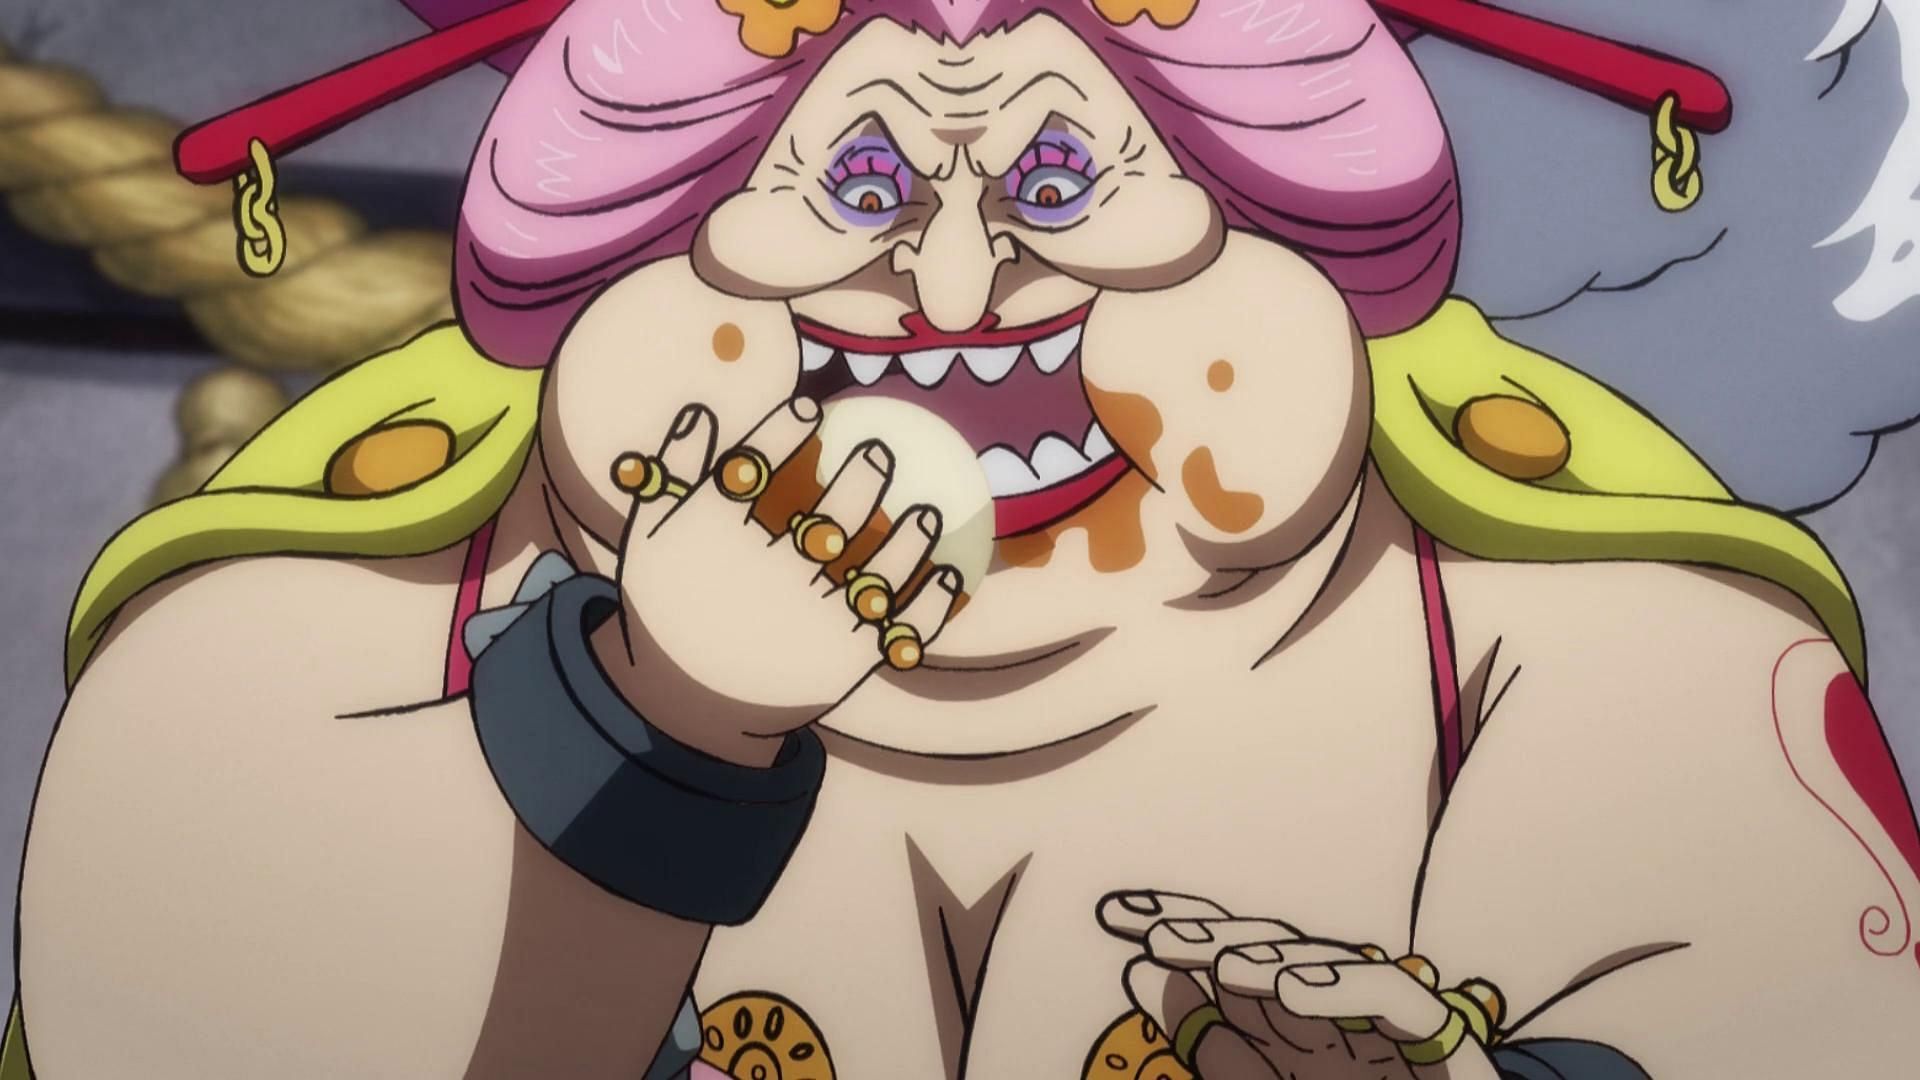 Big Mom as seen in One Piece (Image via Toei Animation, One Piece)